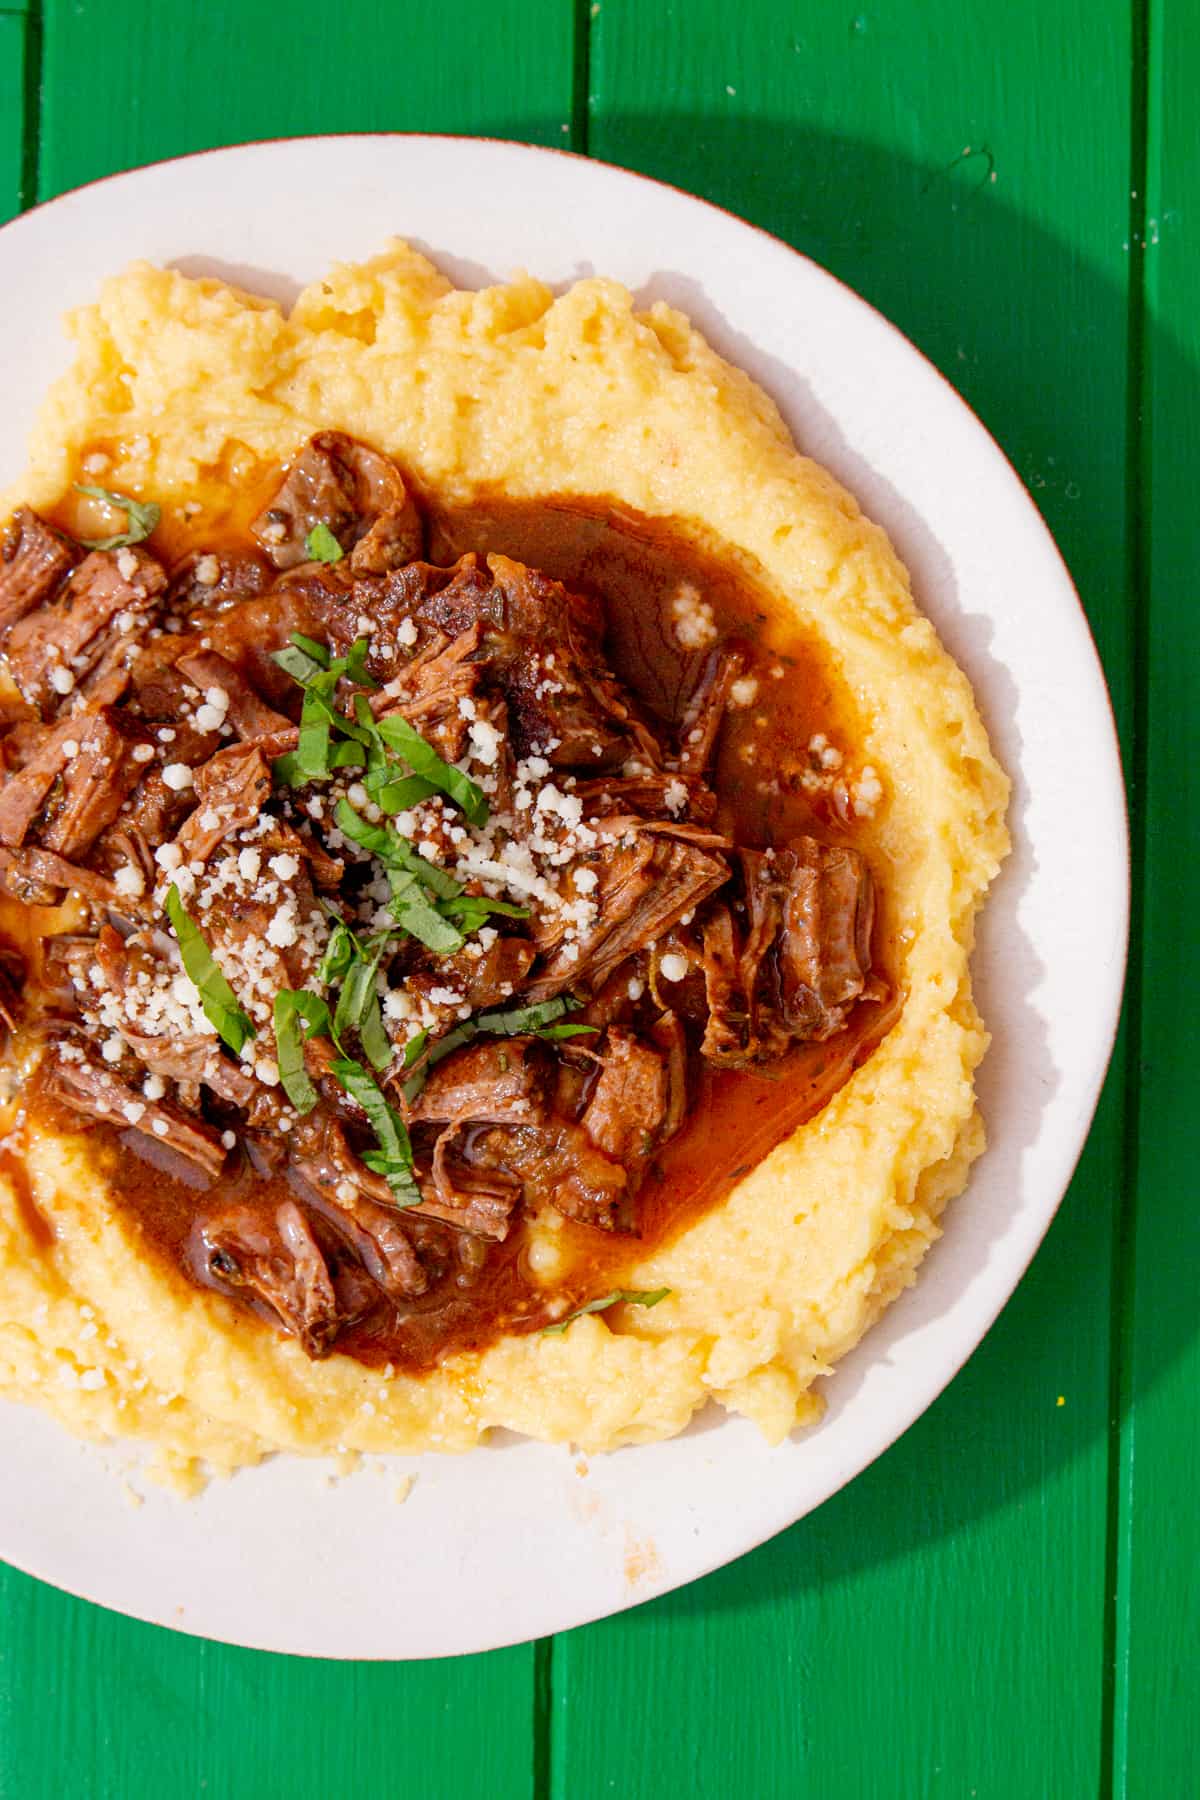 A plate with shredded steak with gravy over a bed of polenta on a green back ground.